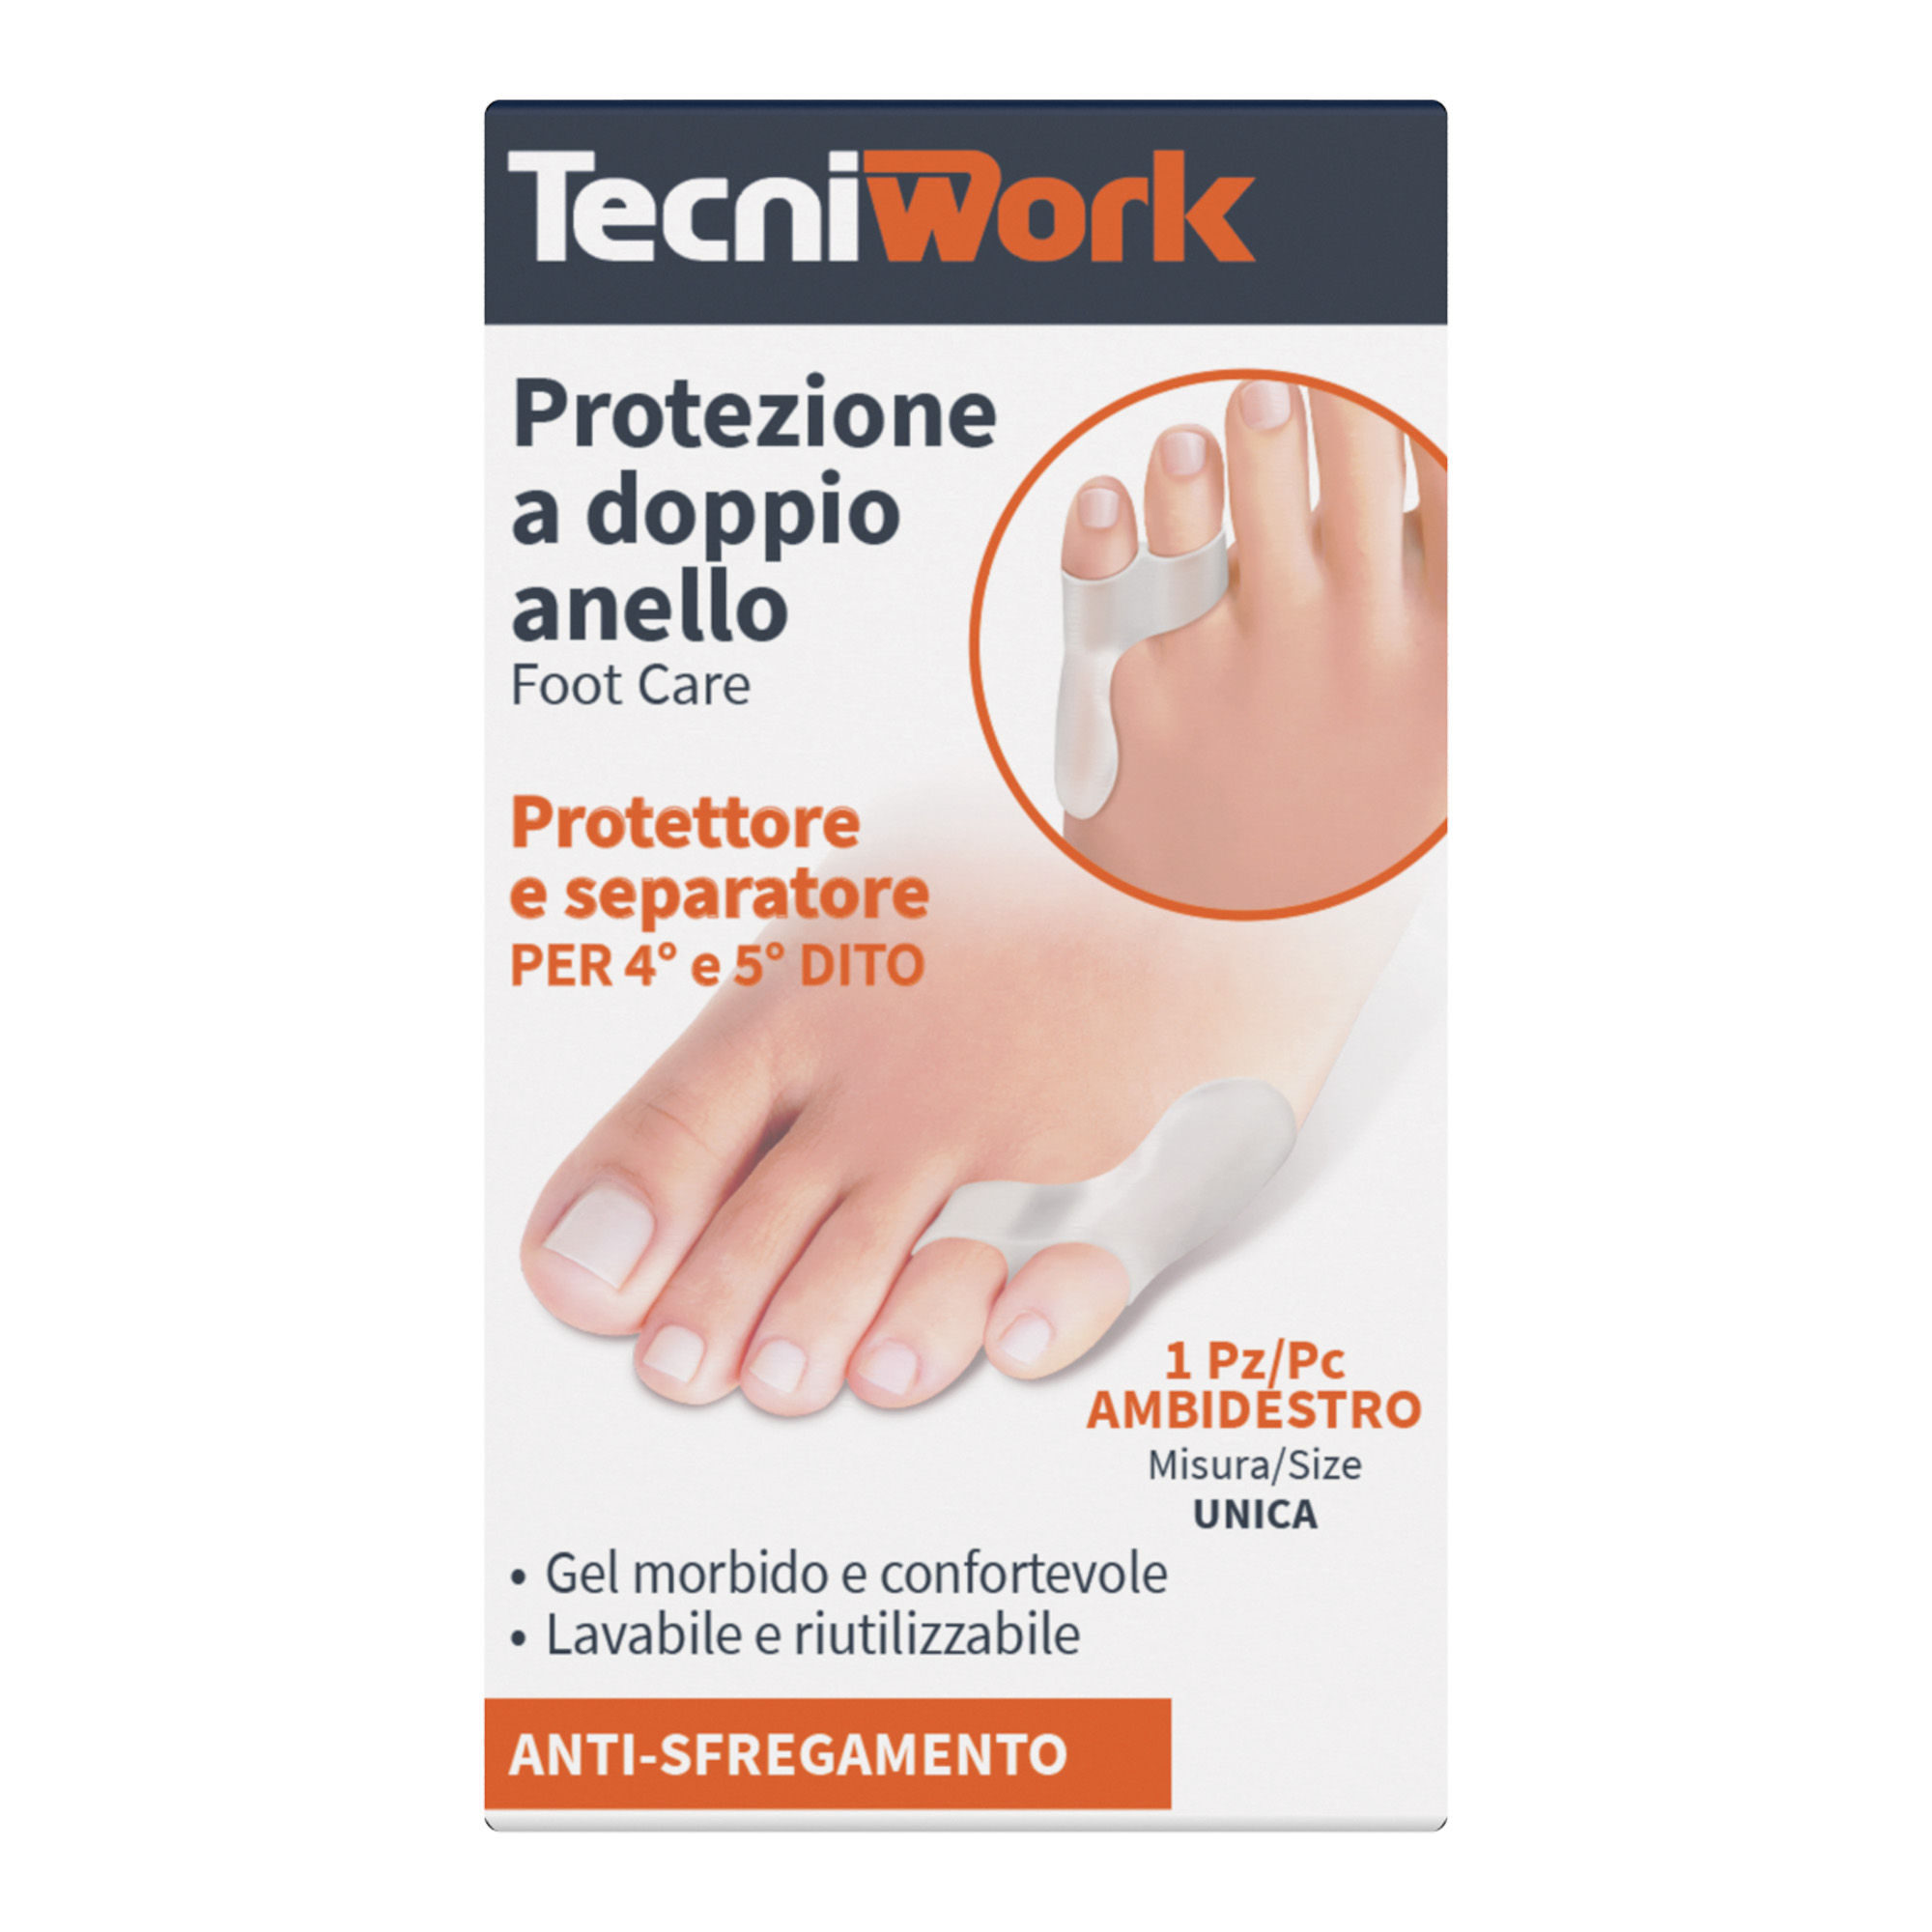 Protector and separator for 4th and 5th toe with double ring made of transparent gel 1 pc